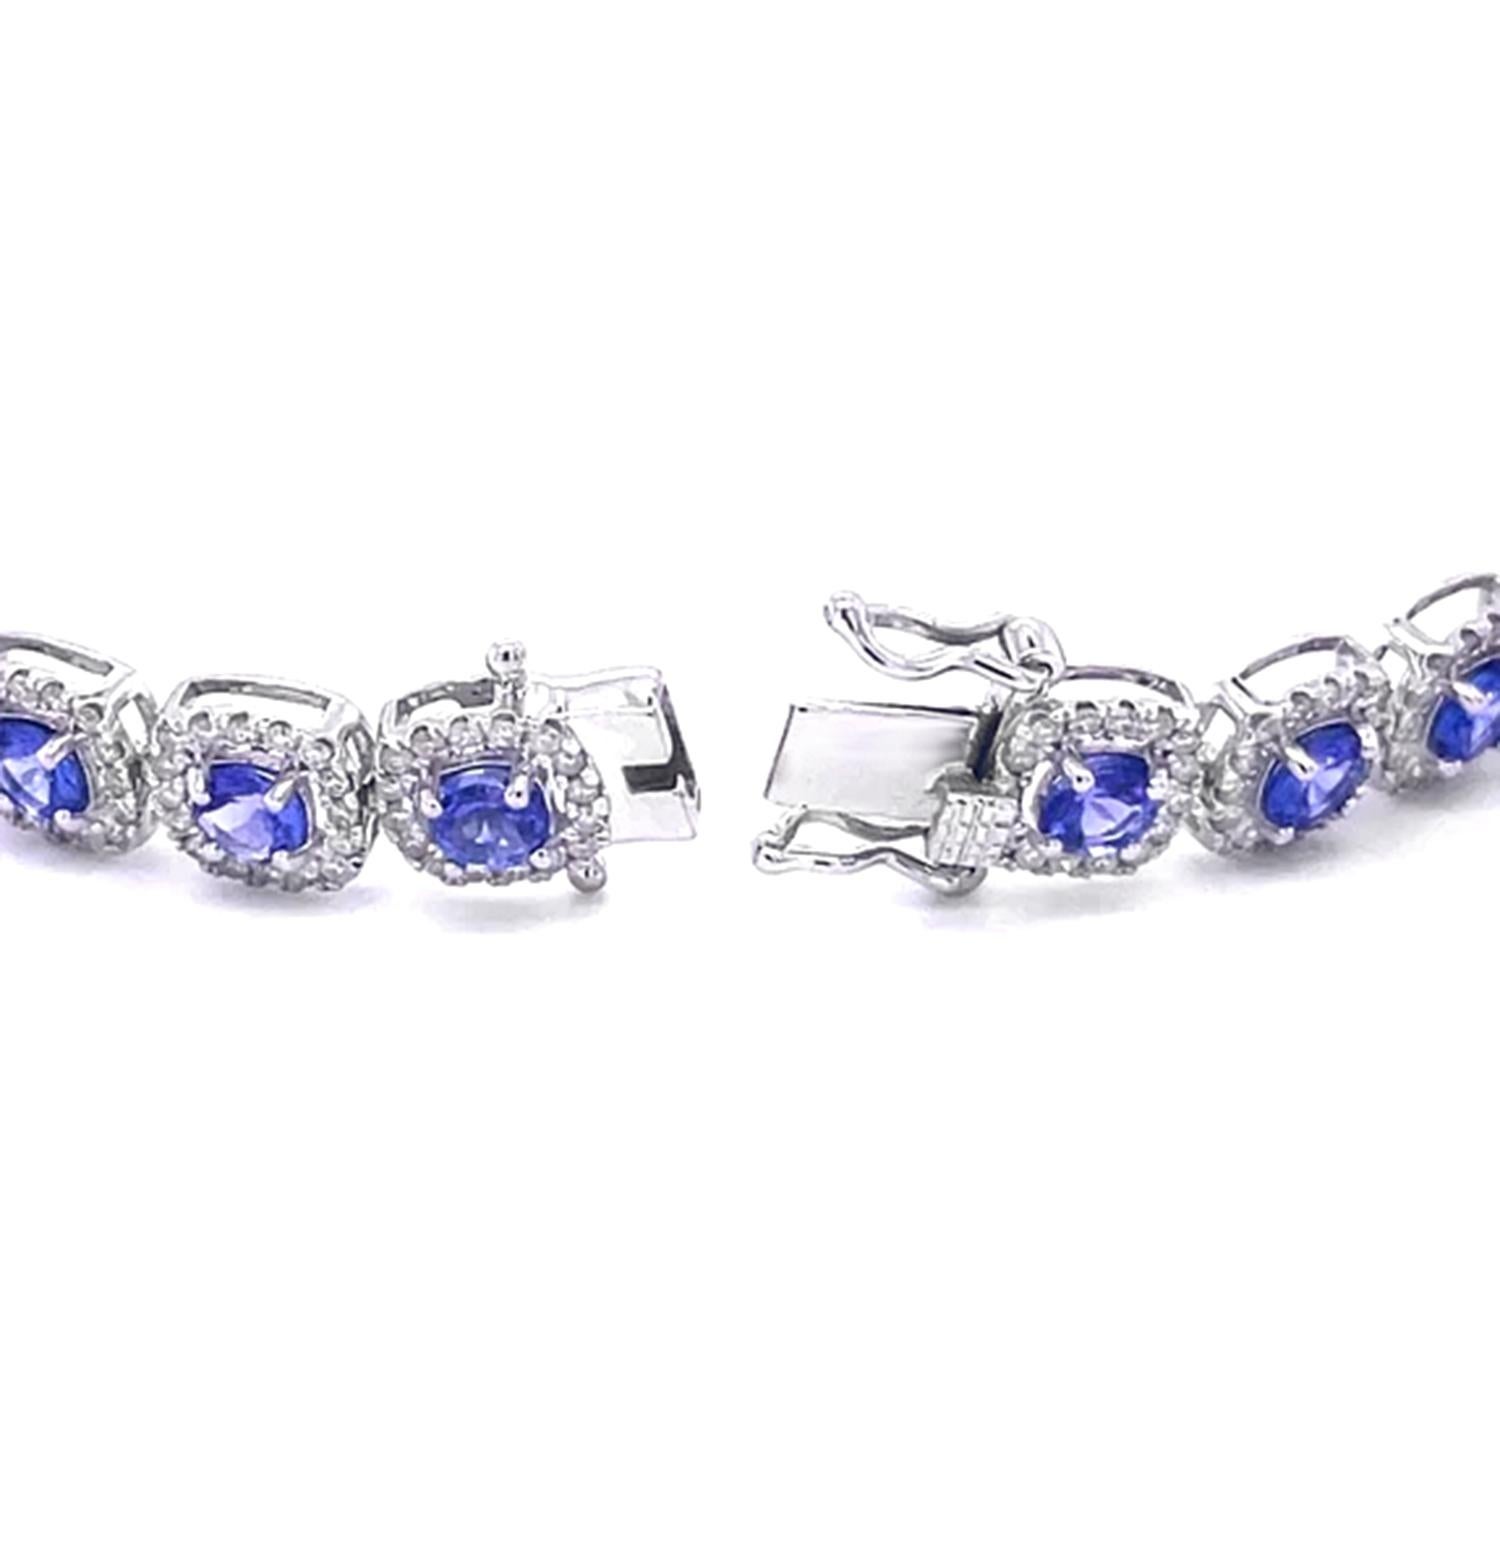 Mixed Cut Tanzanite Bracelet With Diamonds 8.40 Carats 14K White Gold For Sale